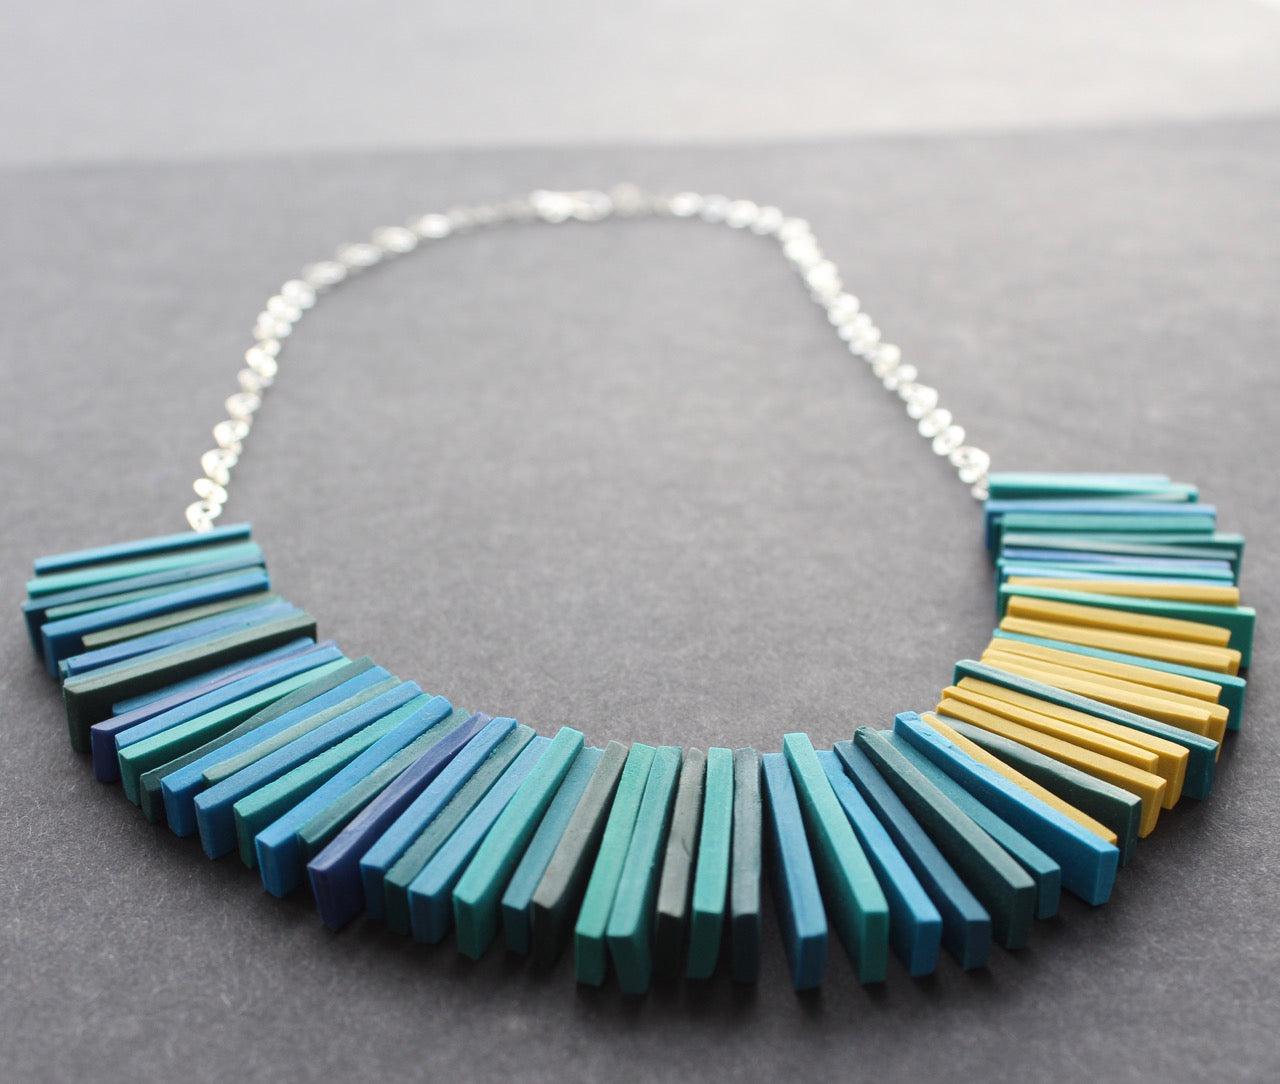 Modern deco necklace in teal blues and yellow by Clare Lloyd